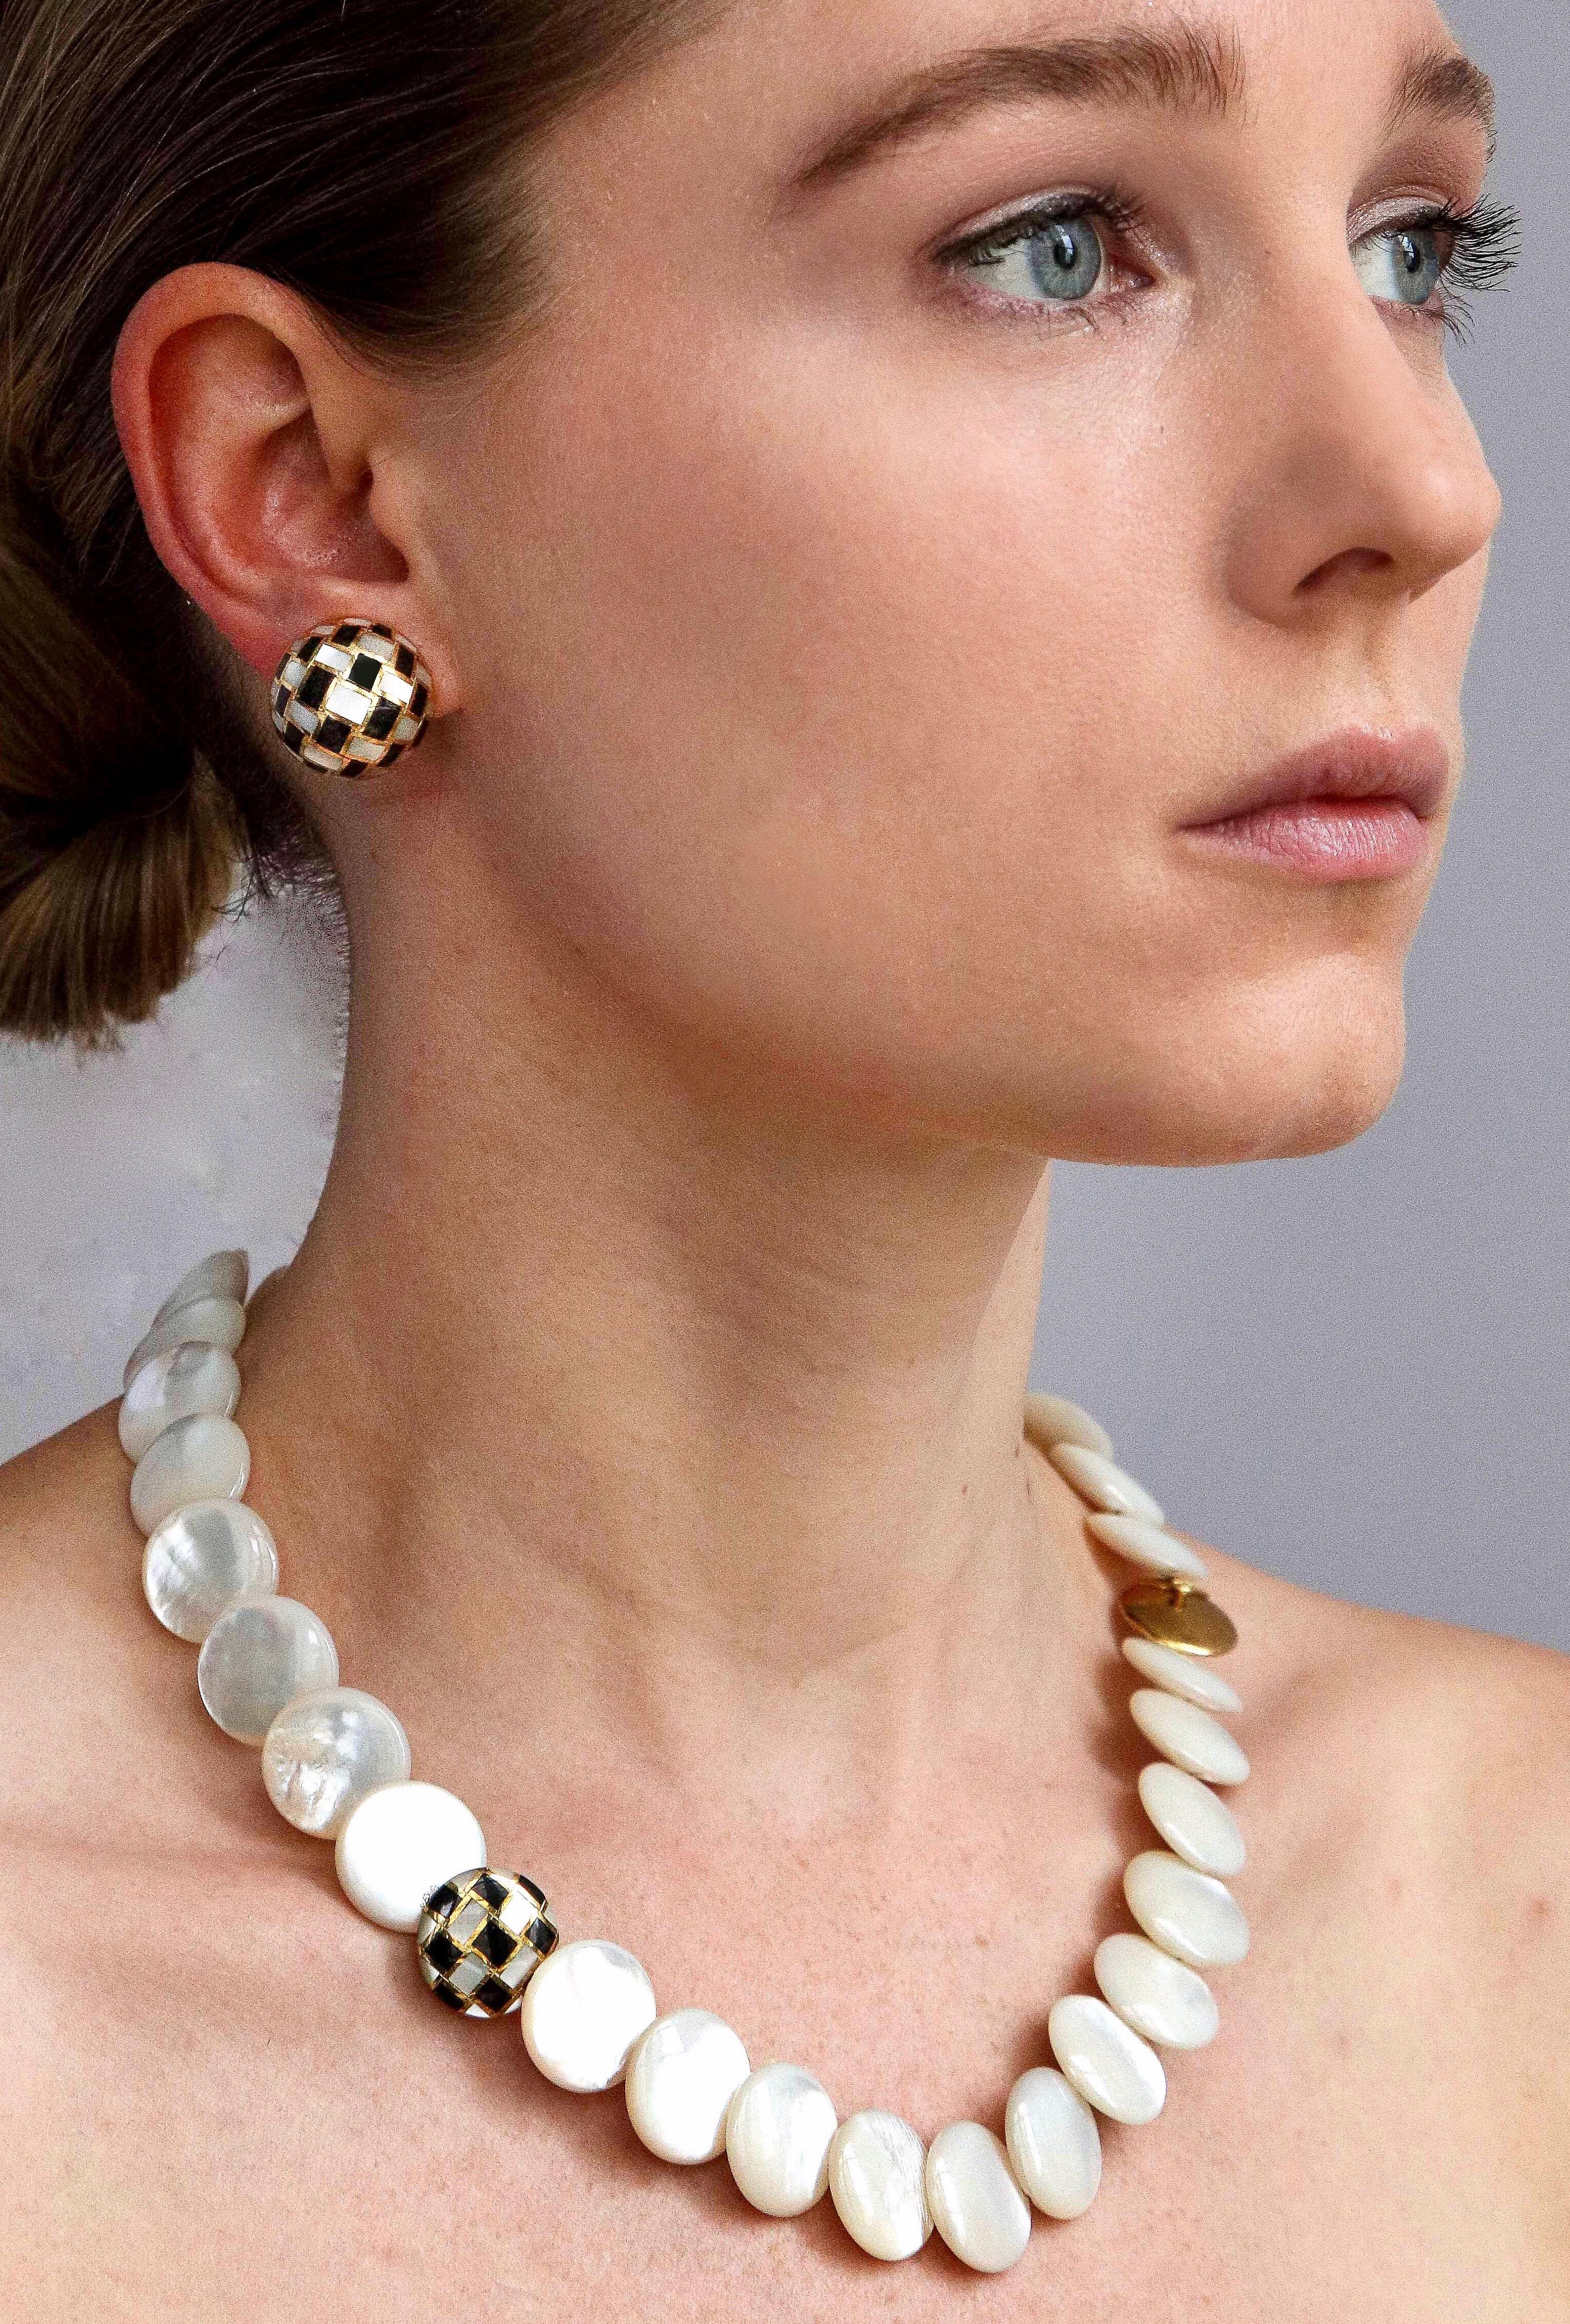 Simply chic for any age, a Tiffany & Co. necklace of carved mother-of-pearl disks with 18K gold clasp and a perfectly placed checkered disk of pearl and black jade inlay with matching ear clips. Necklace measures 3/4 inch x 20 inches long weighing